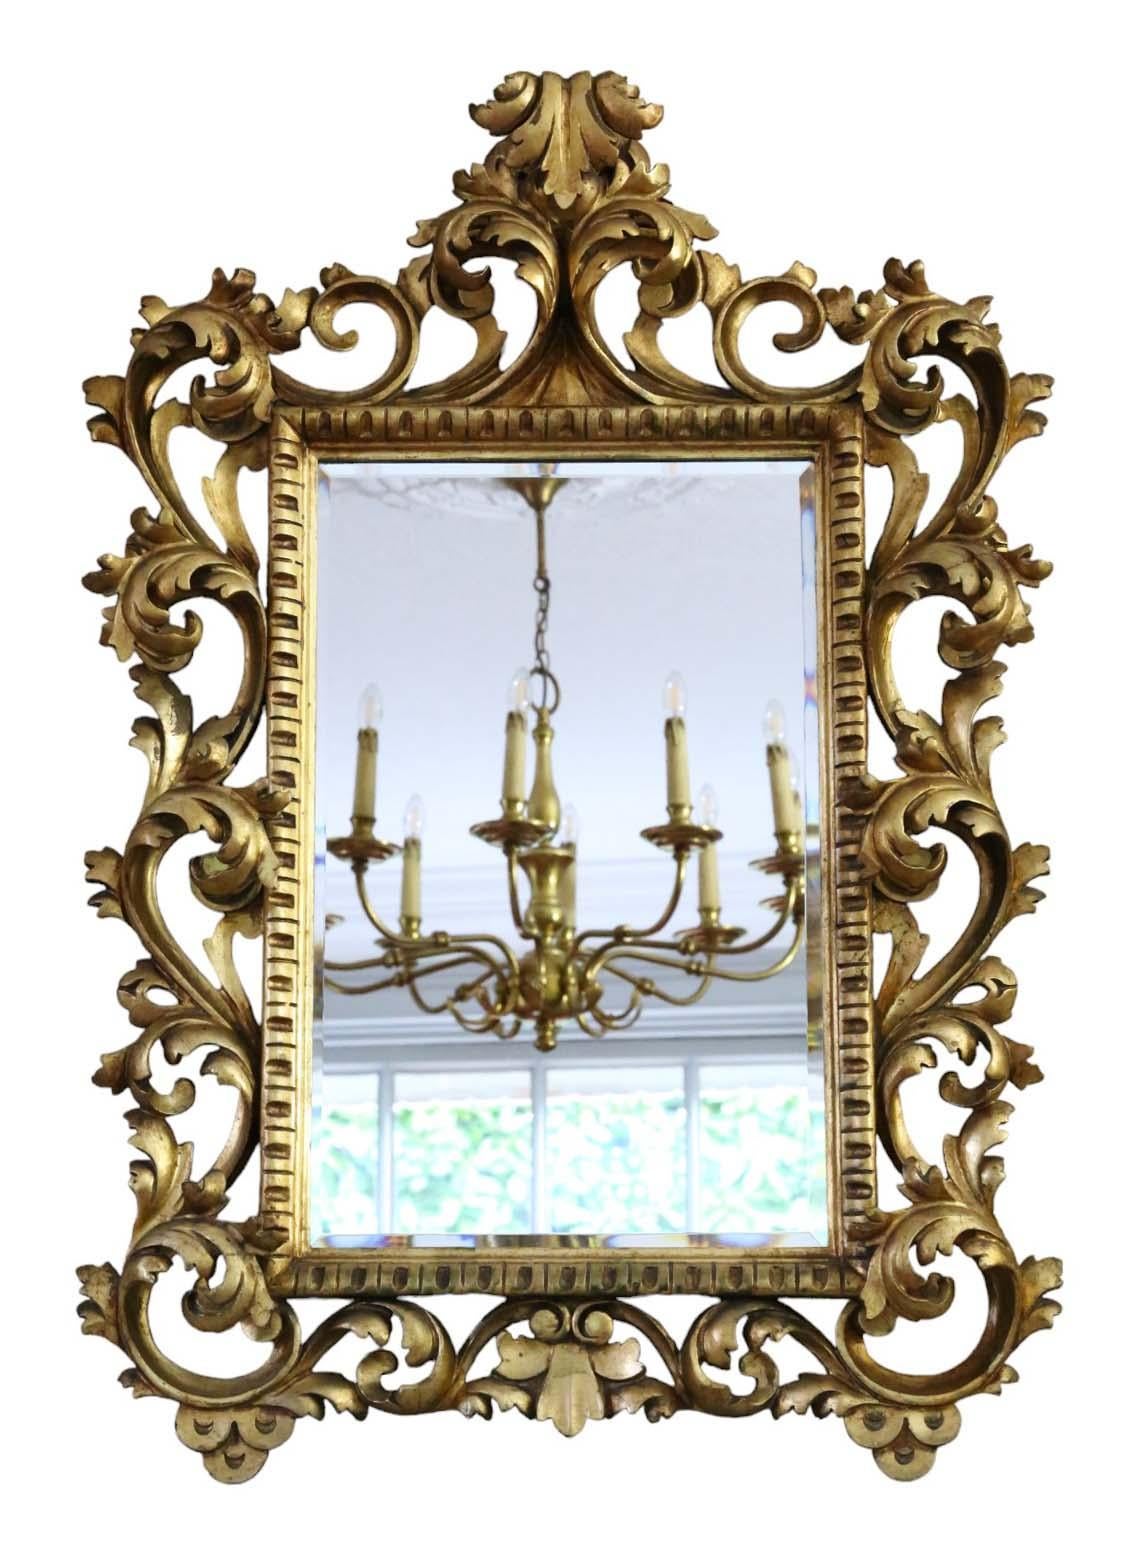 Antique large giltwood overmantle wall mirror from the 19th Century, boasting fine quality craftsmanship.

This mirror enchants with its striking Florentine design, adding character to any suitable space. The frame is robust, free from loose joints